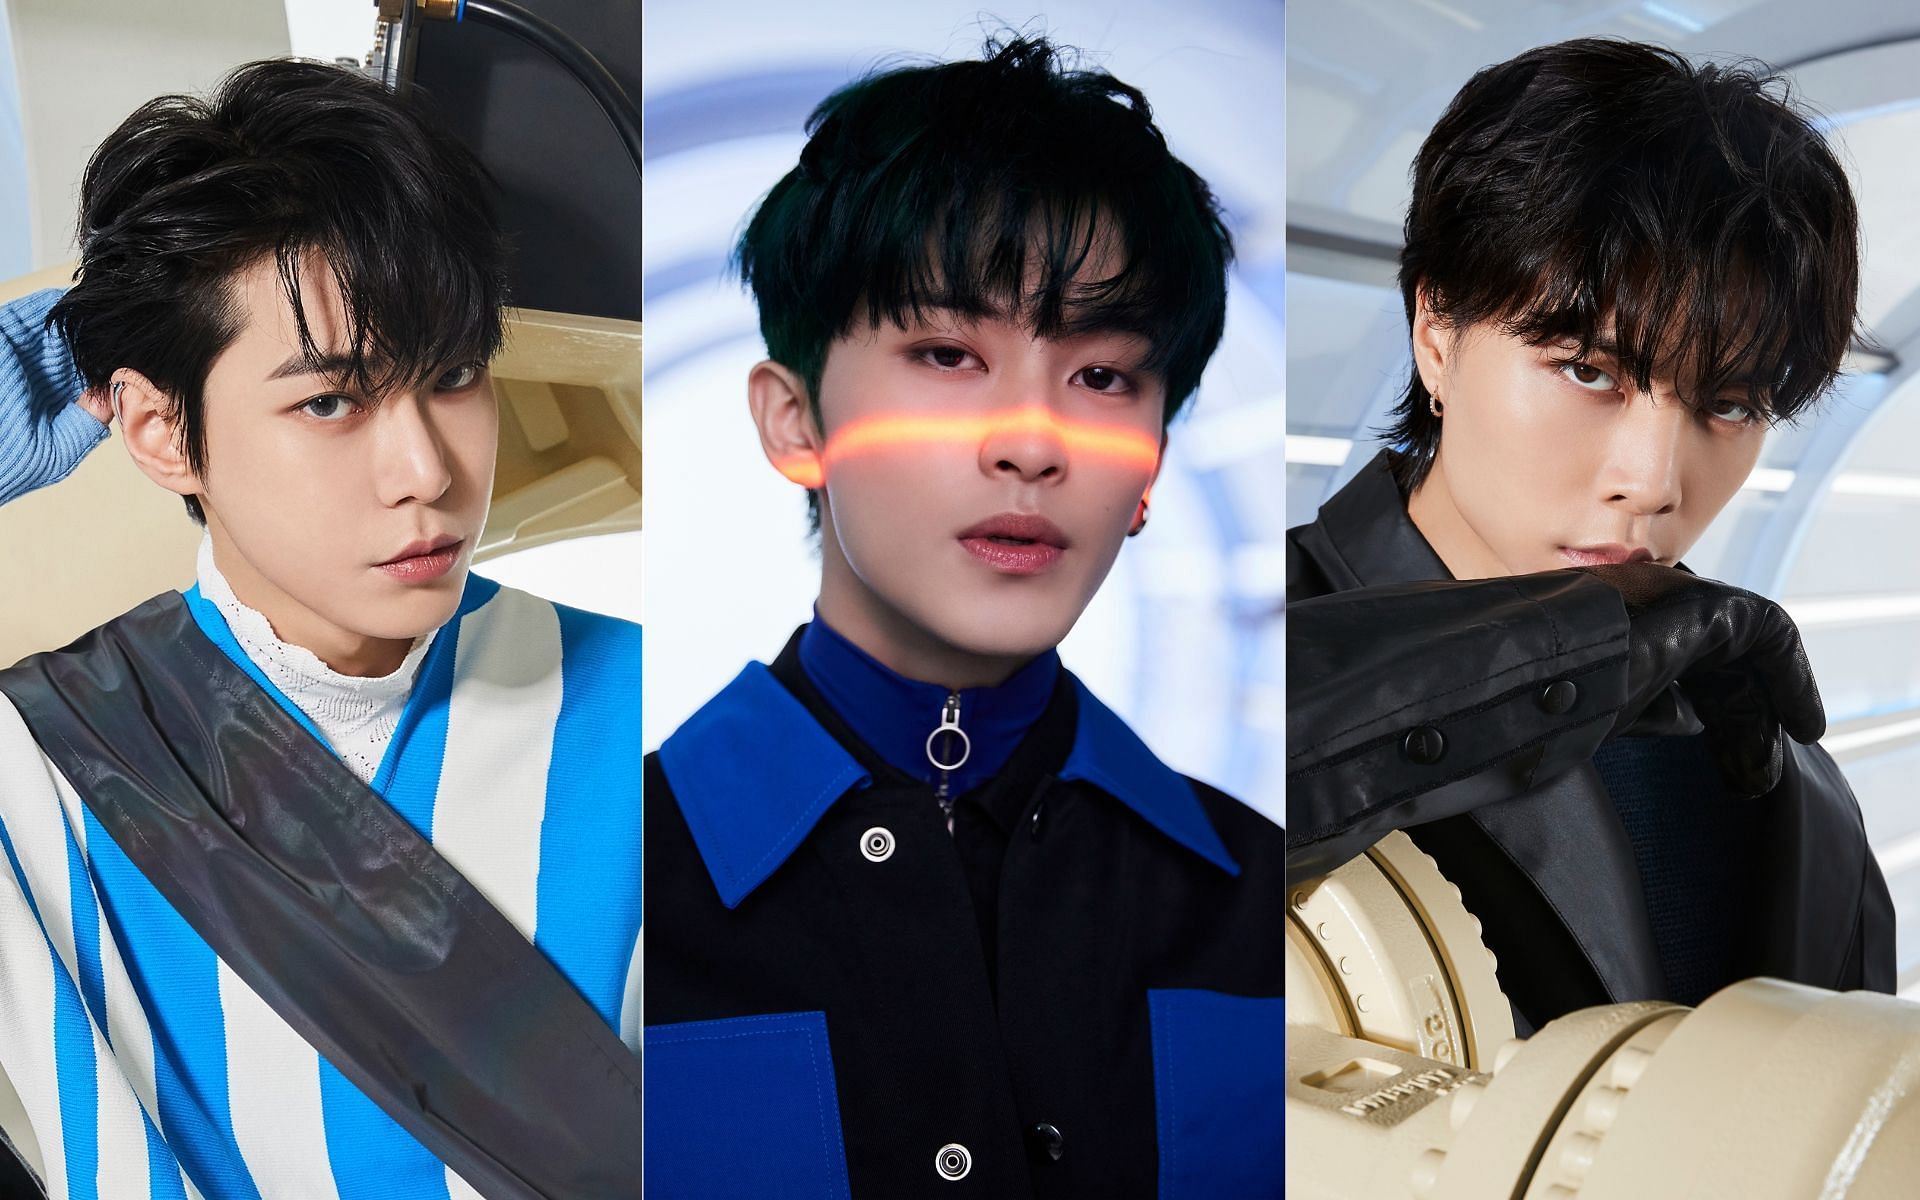 NCT&#039;s Doyoung, Mark, and Johnny &#039;Universe&#039; concept photos (Images via @NCTsmtown/Twitter)